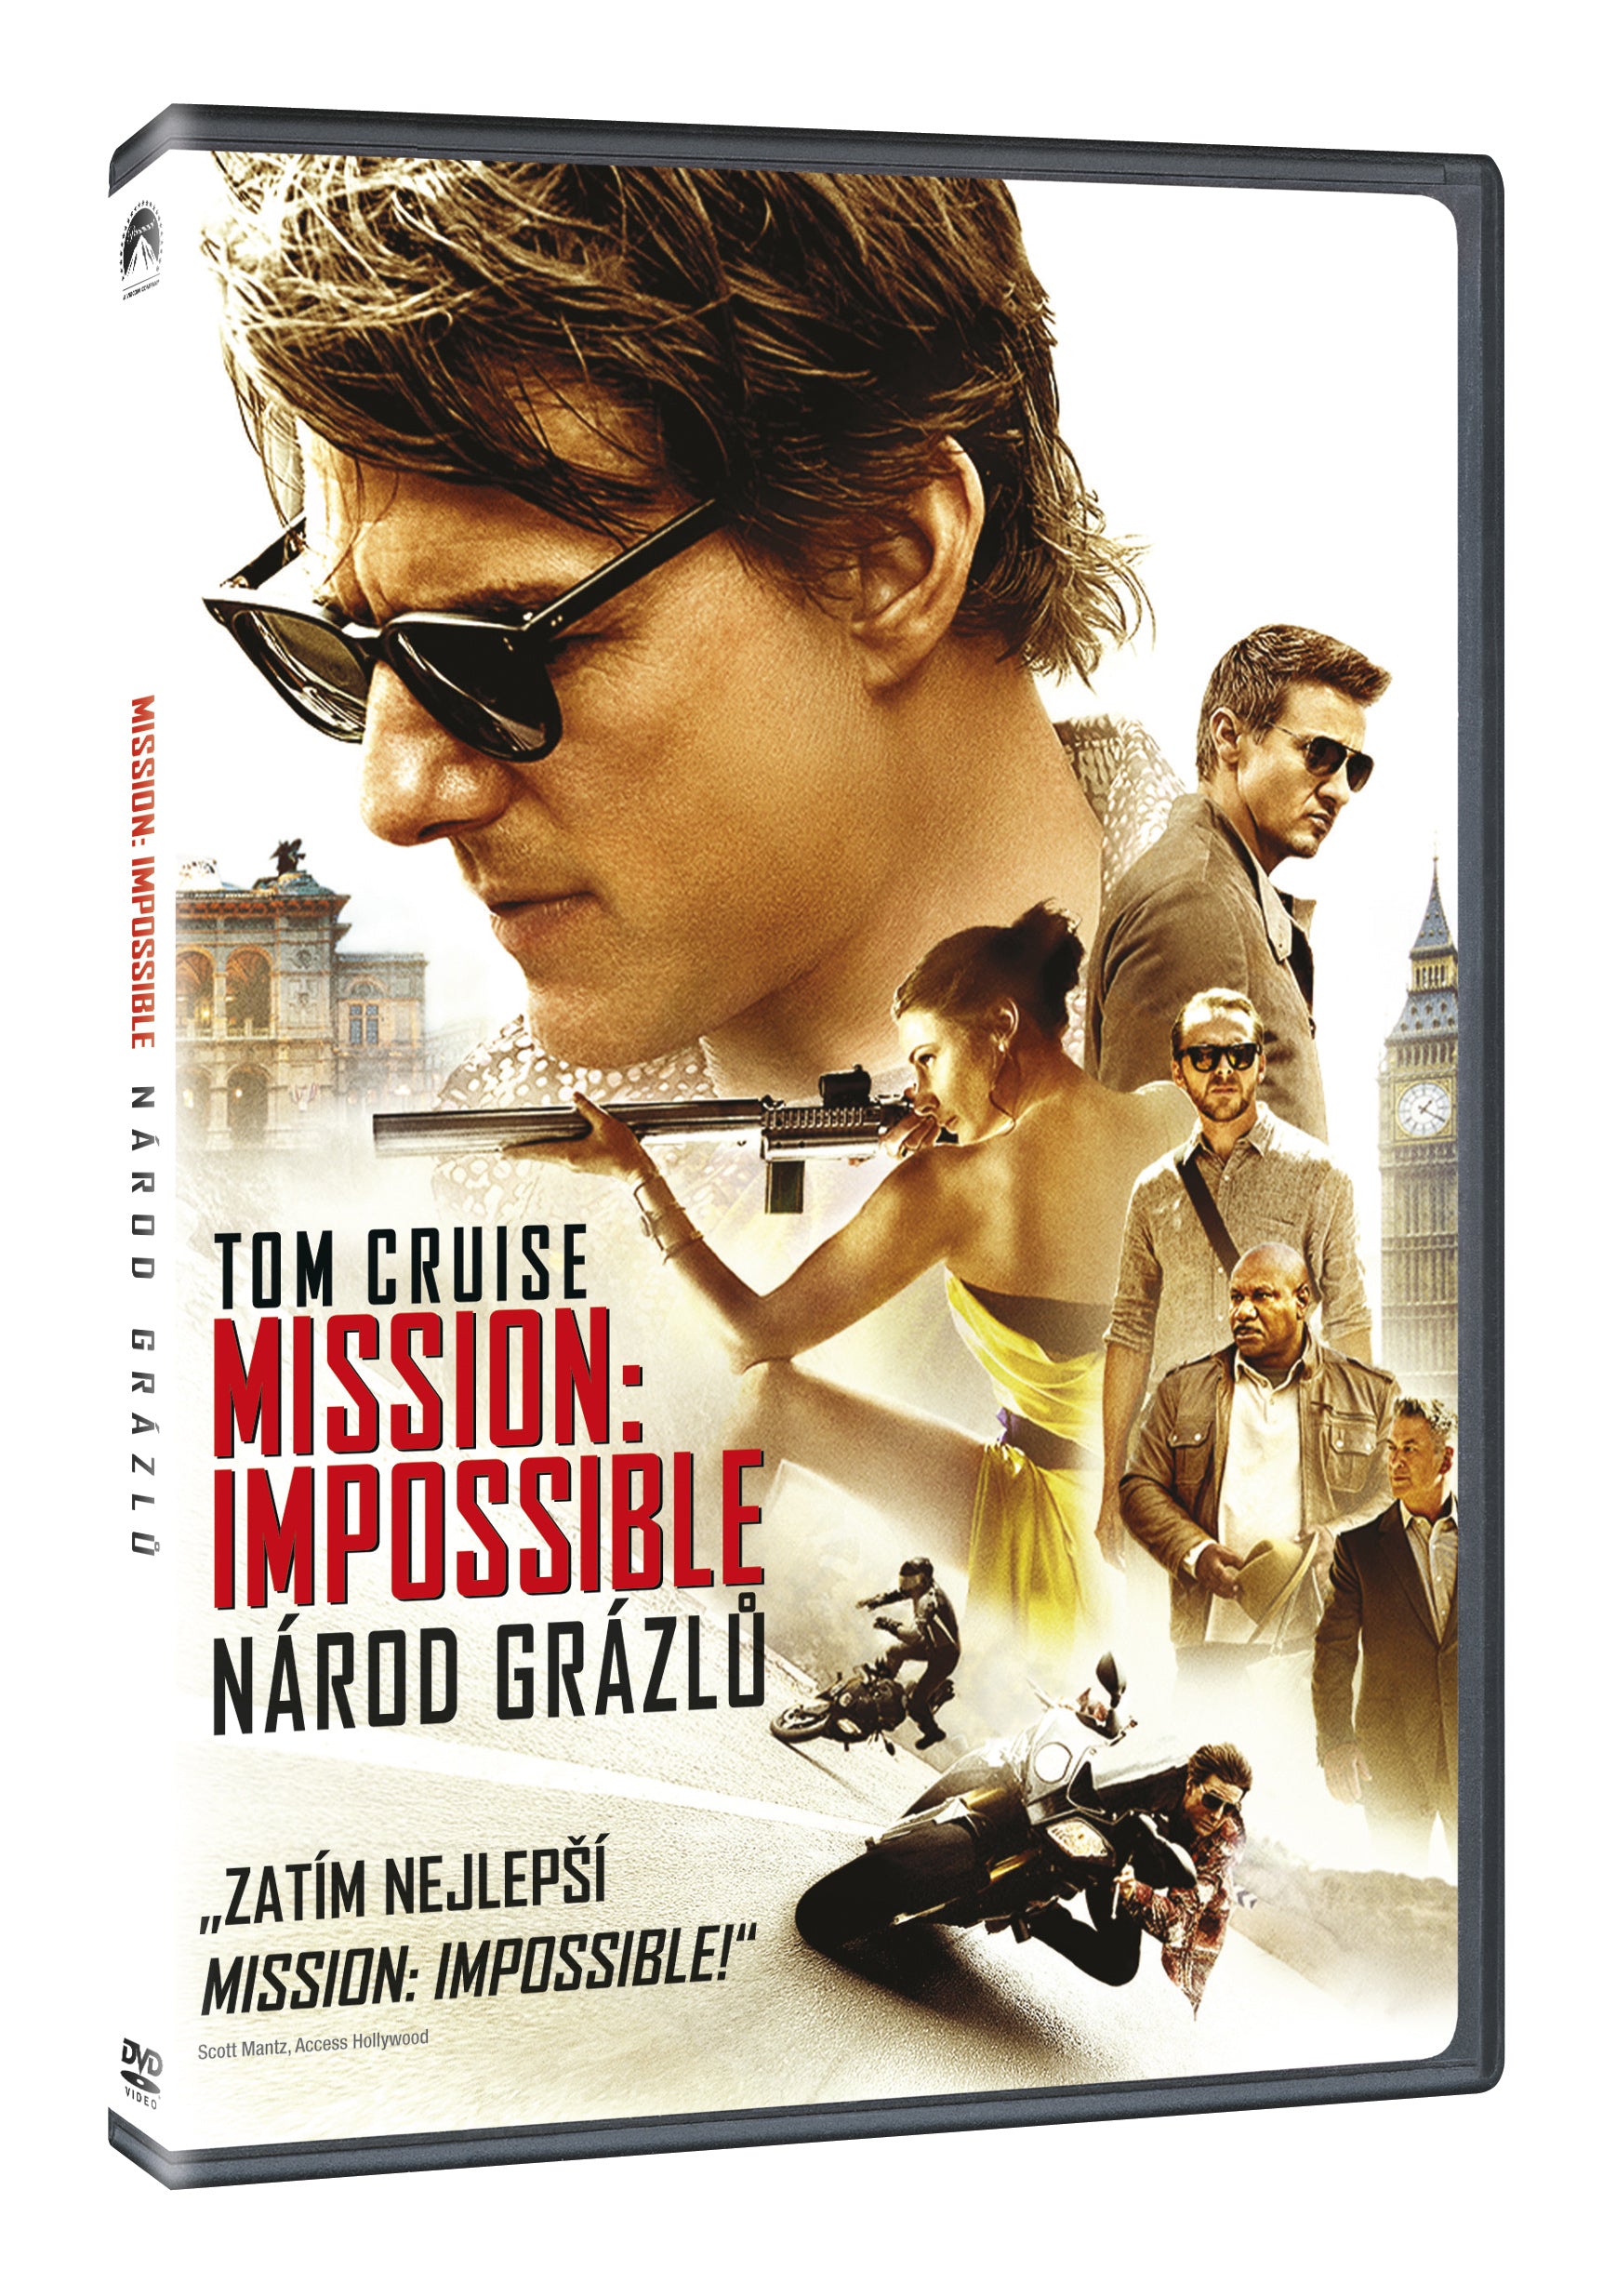 Mission: Impossible - Narod grazlu DVD / Mission: Impossible - Rogue Nation